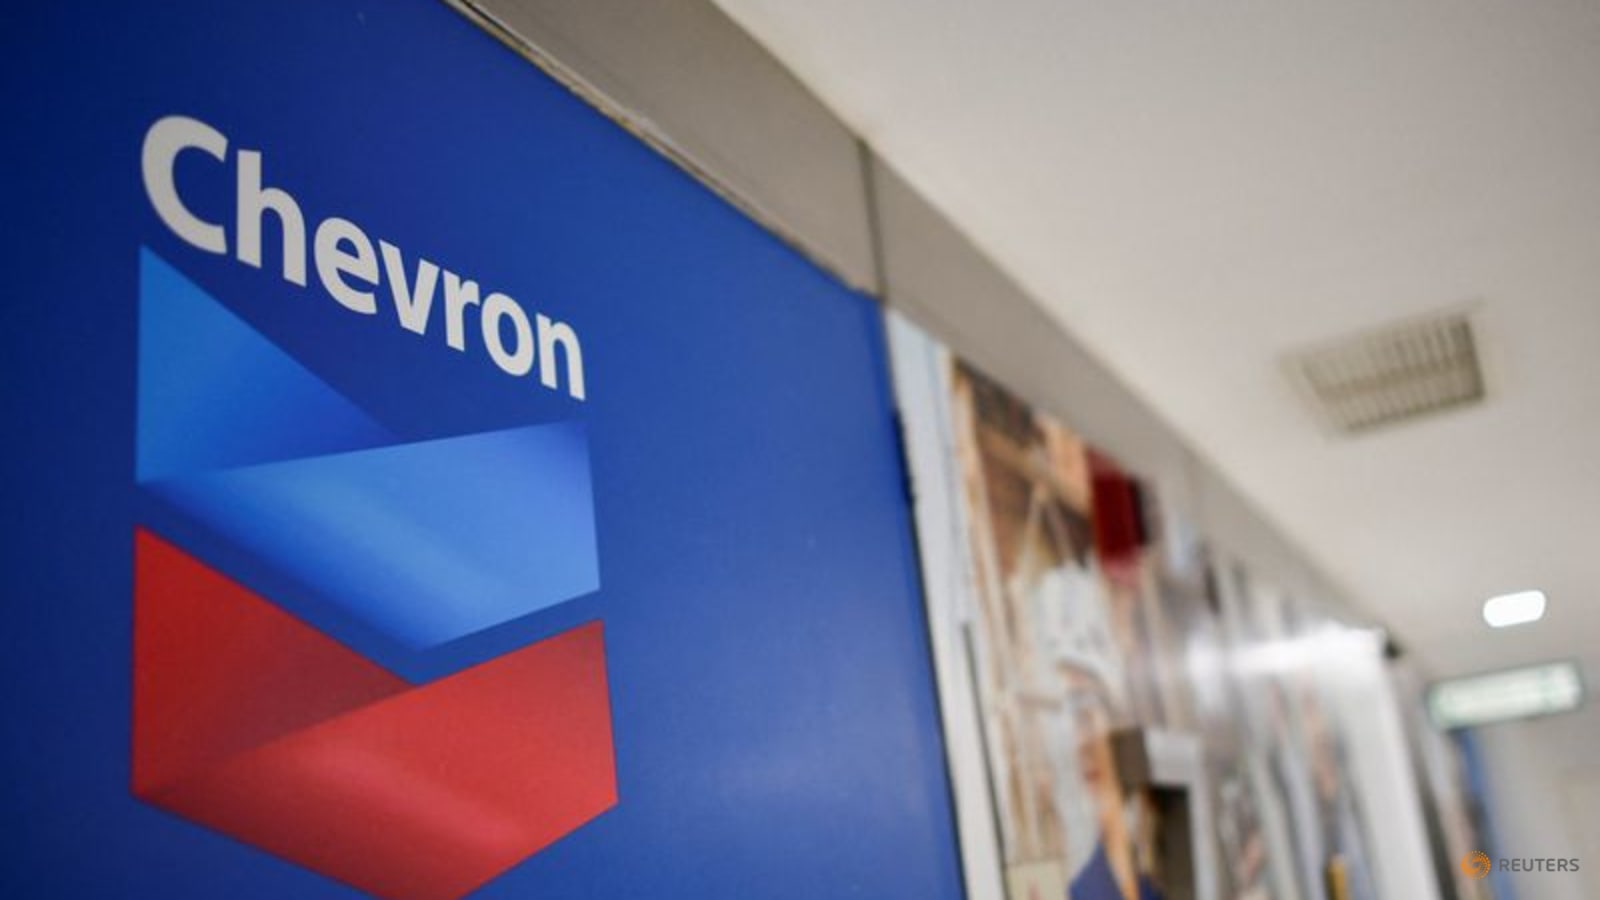 chevron-agrees-to-sell-myanmar-assets-and-exit-country